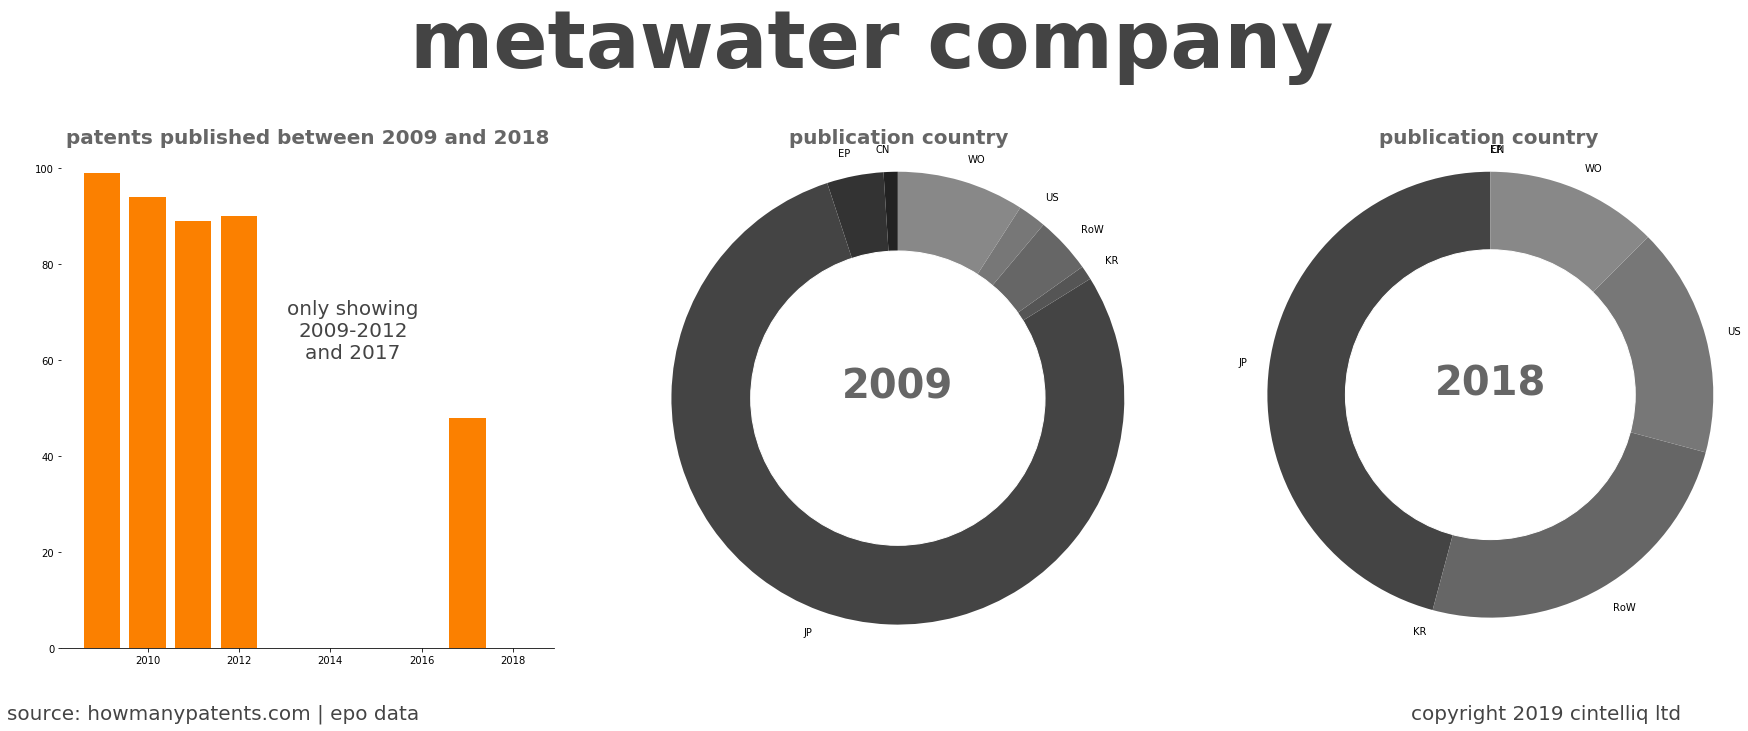 summary of patents for Metawater Company